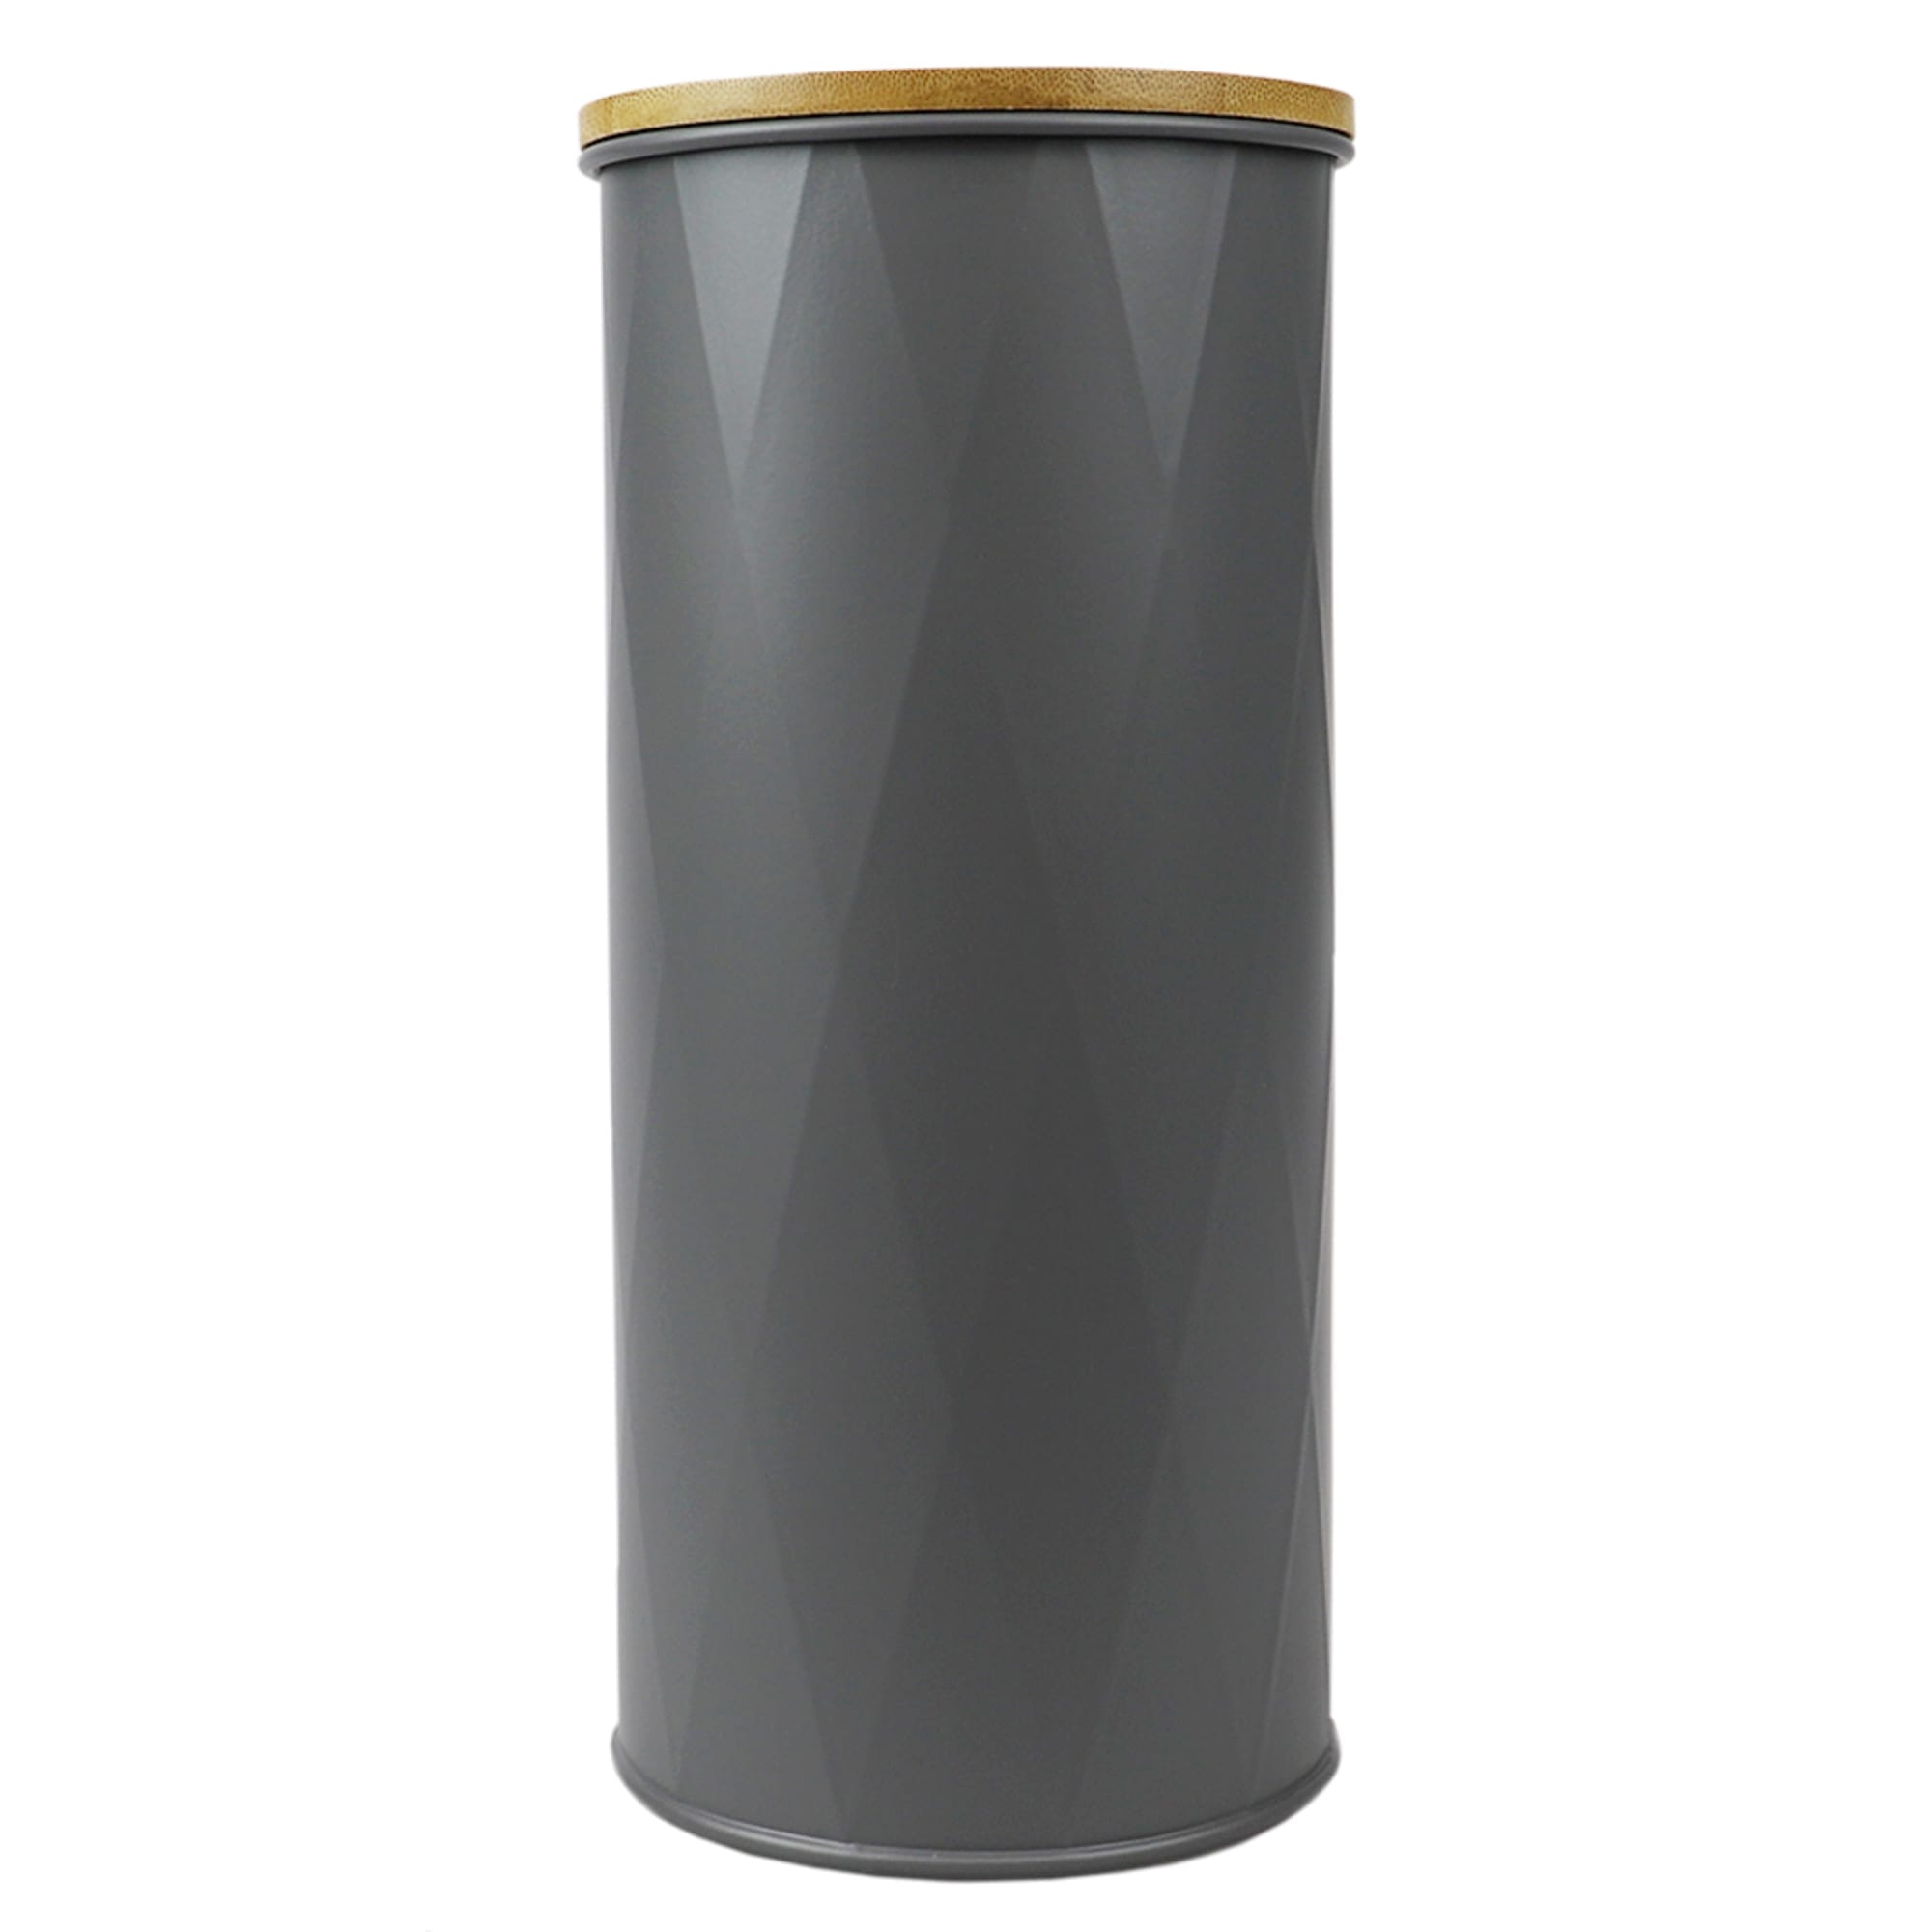 Home Basics Large 2.2 ml Tin Canister with Bamboo Lid, Grey $4.00 EACH, CASE PACK OF 12